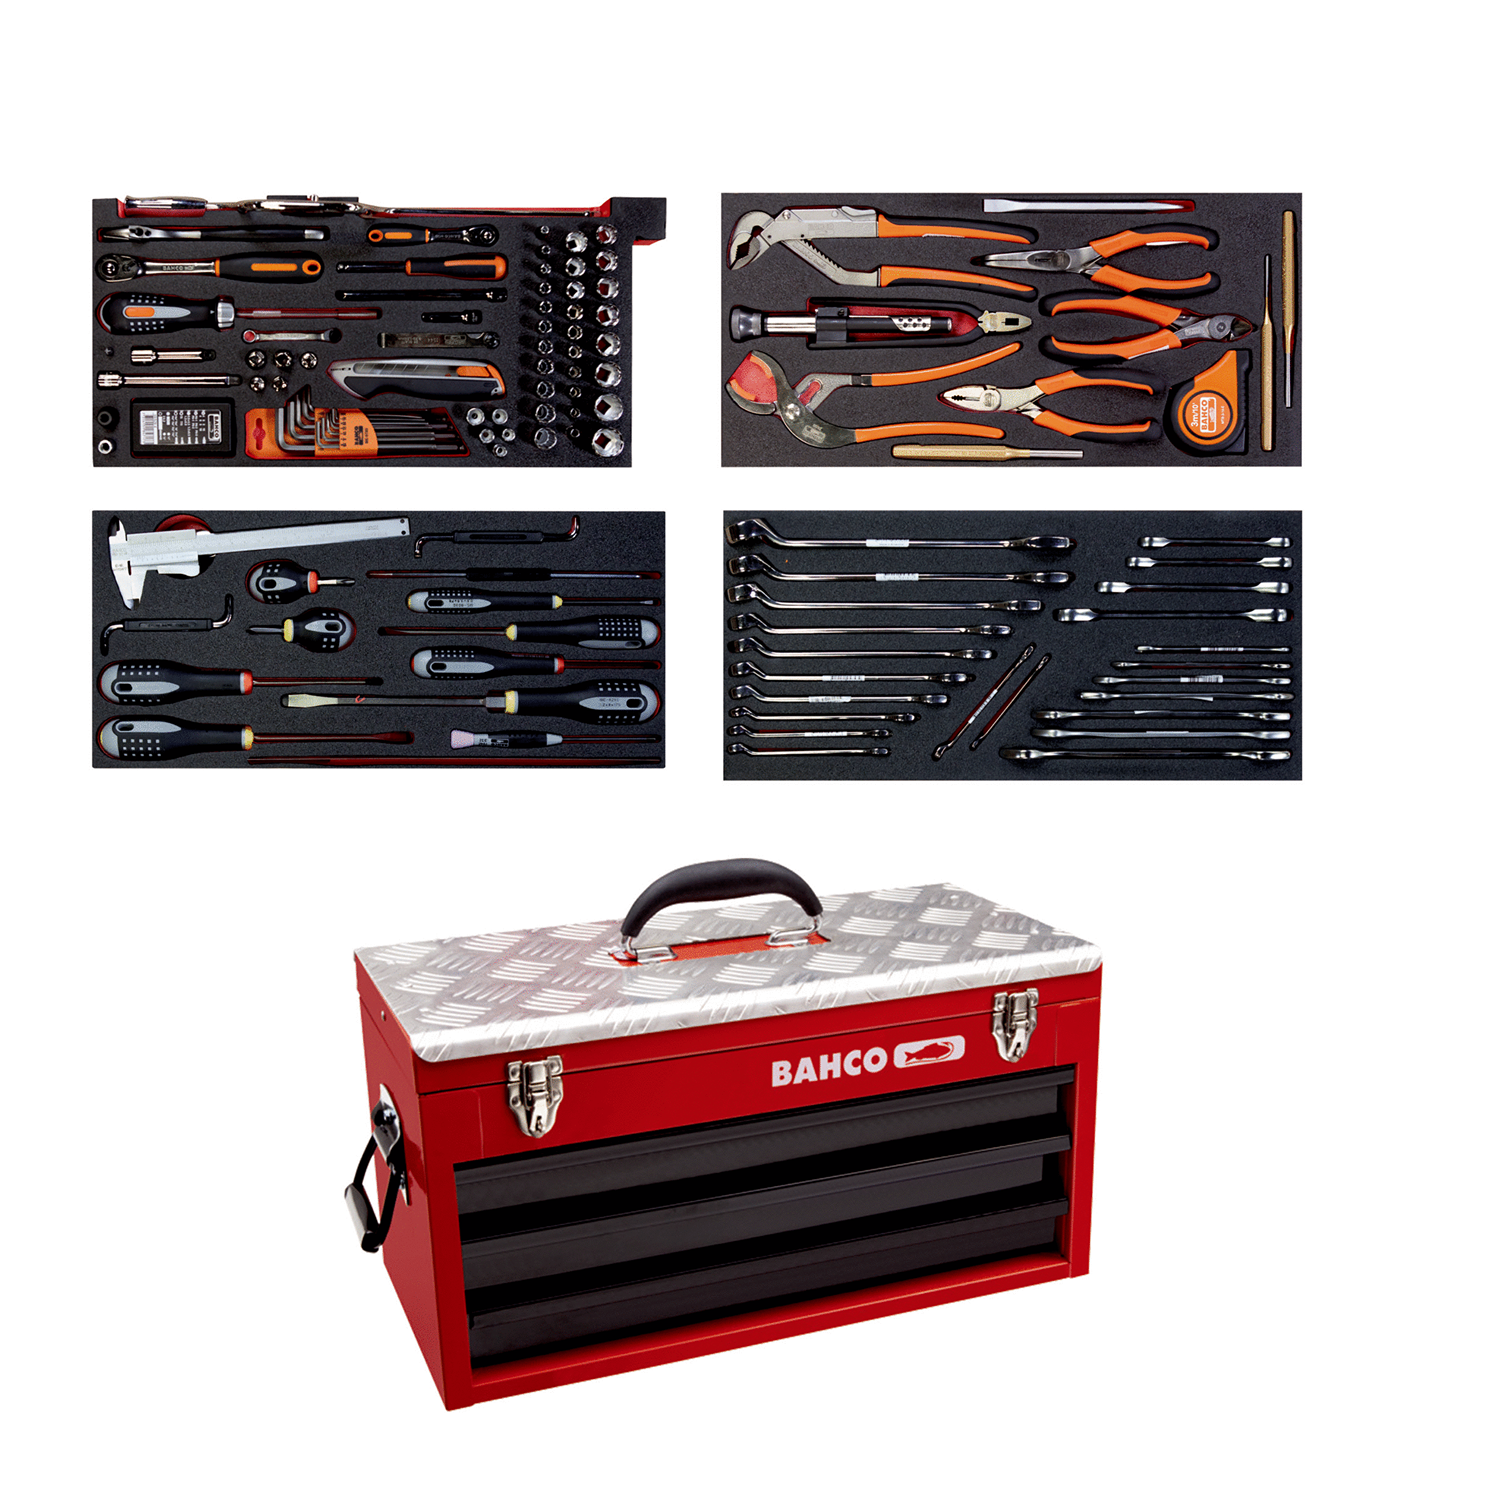 BAHCO 1483KHD3RB-FF2 Metallic Tool Box Aviation Toolkit - 152 Pcs - Premium Toolkit from BAHCO - Shop now at Yew Aik.